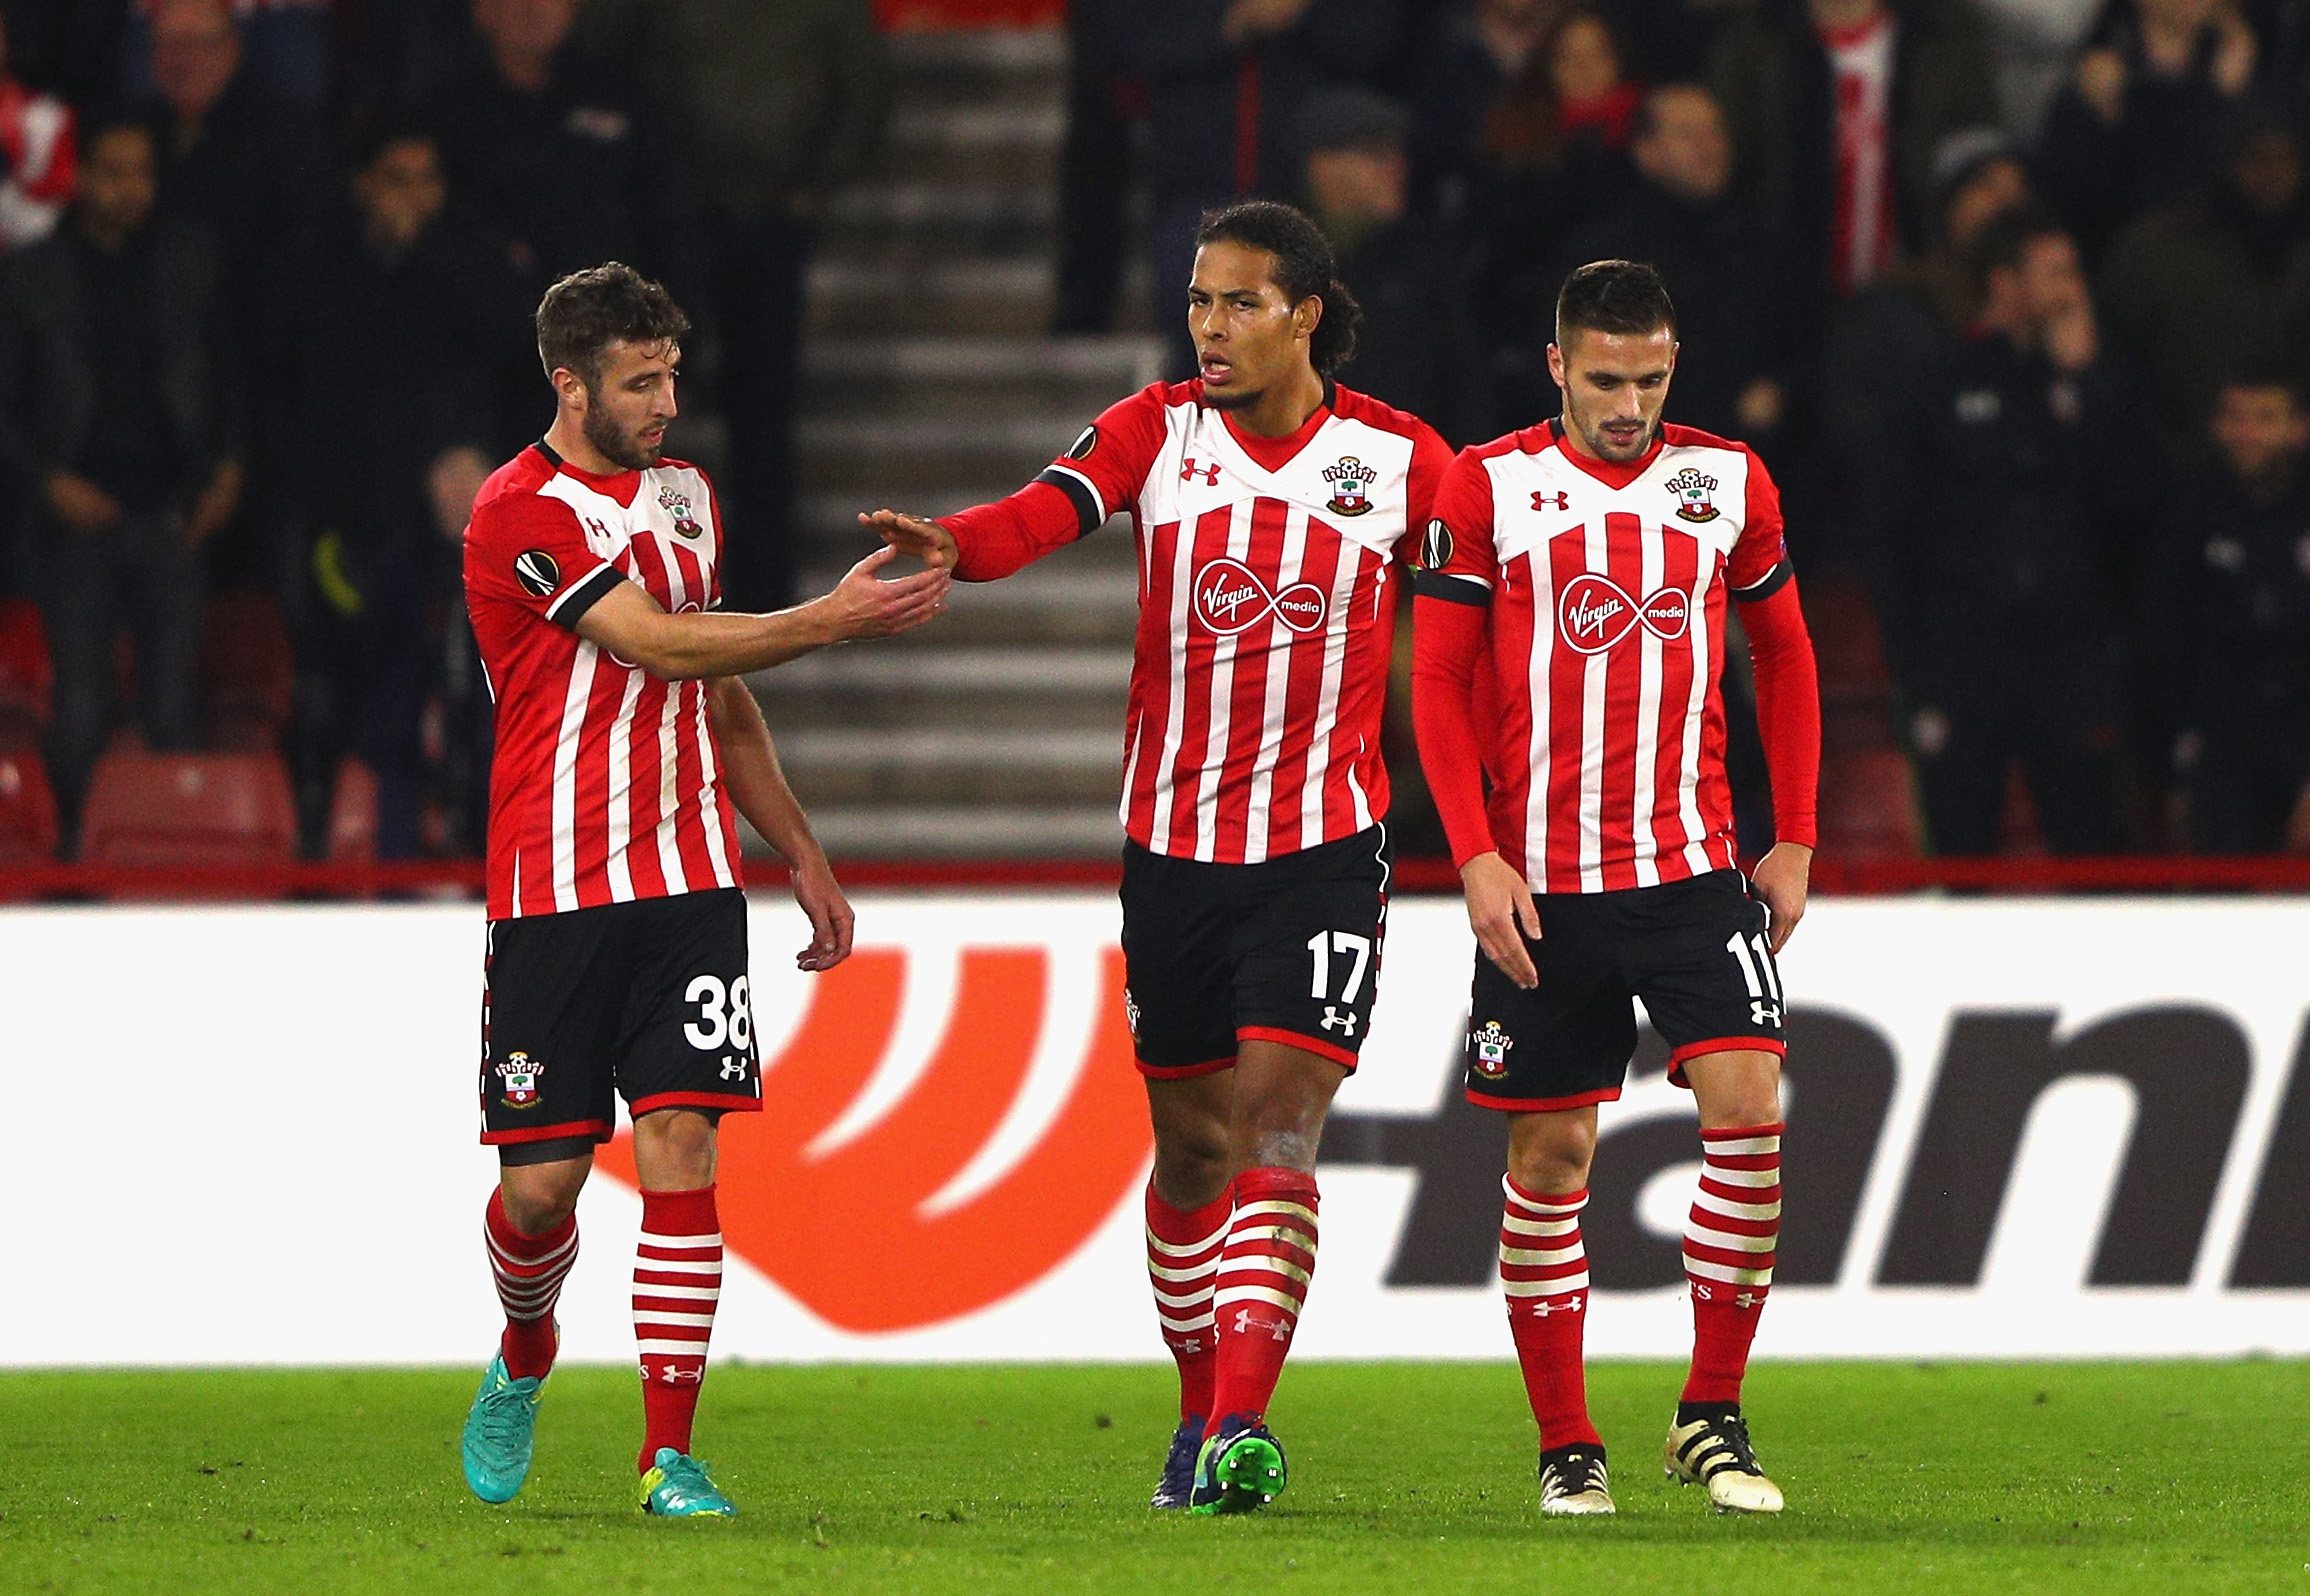 SOUTHAMPTON, ENGLAND - NOVEMBER 03:  Virgil van Dijk of Southampton (C) celebrates with Sam McQueen (L) and Dusan Tadic (R) after scoring his team's first goal during the UEFA Europa League Group K match between Southampton FC and FC Internazionale Milano at St Mary's Stadium on November 3, 2016 in Southampton, England.  (Photo by Ian Walton/Getty Images)